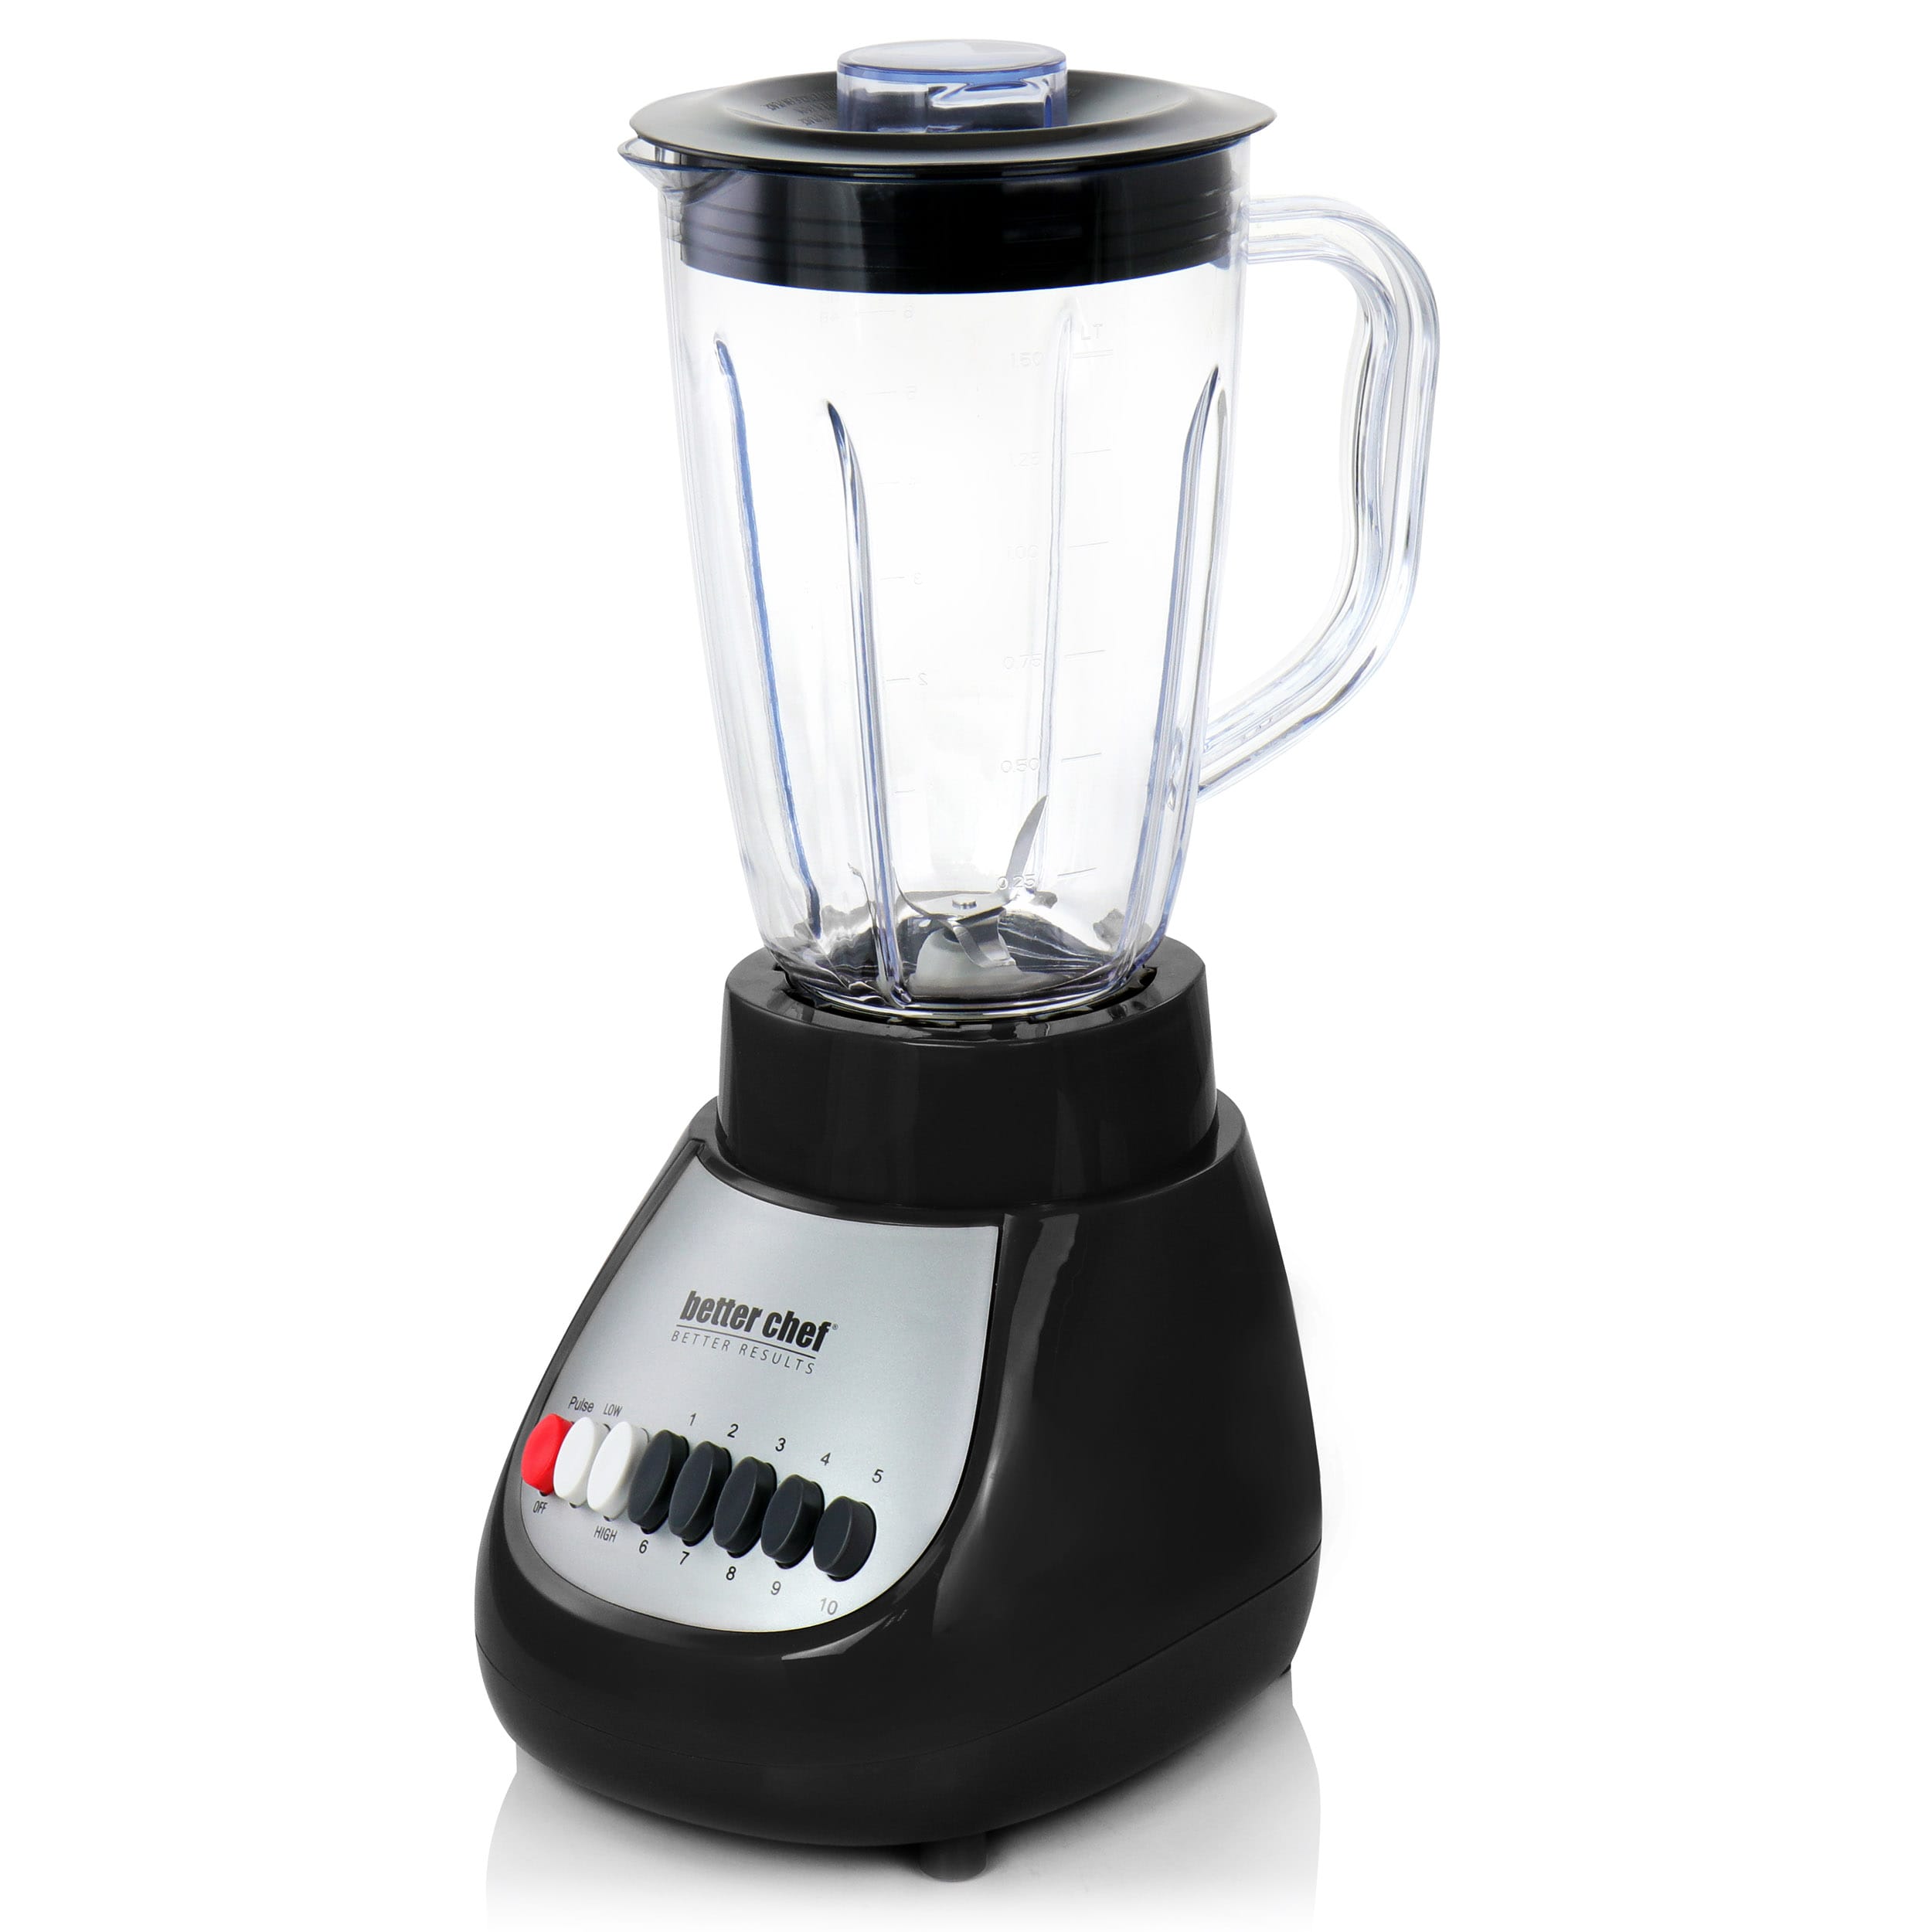 West Bend Hand Mixer Plus with Immersion Blender Attachment - Black